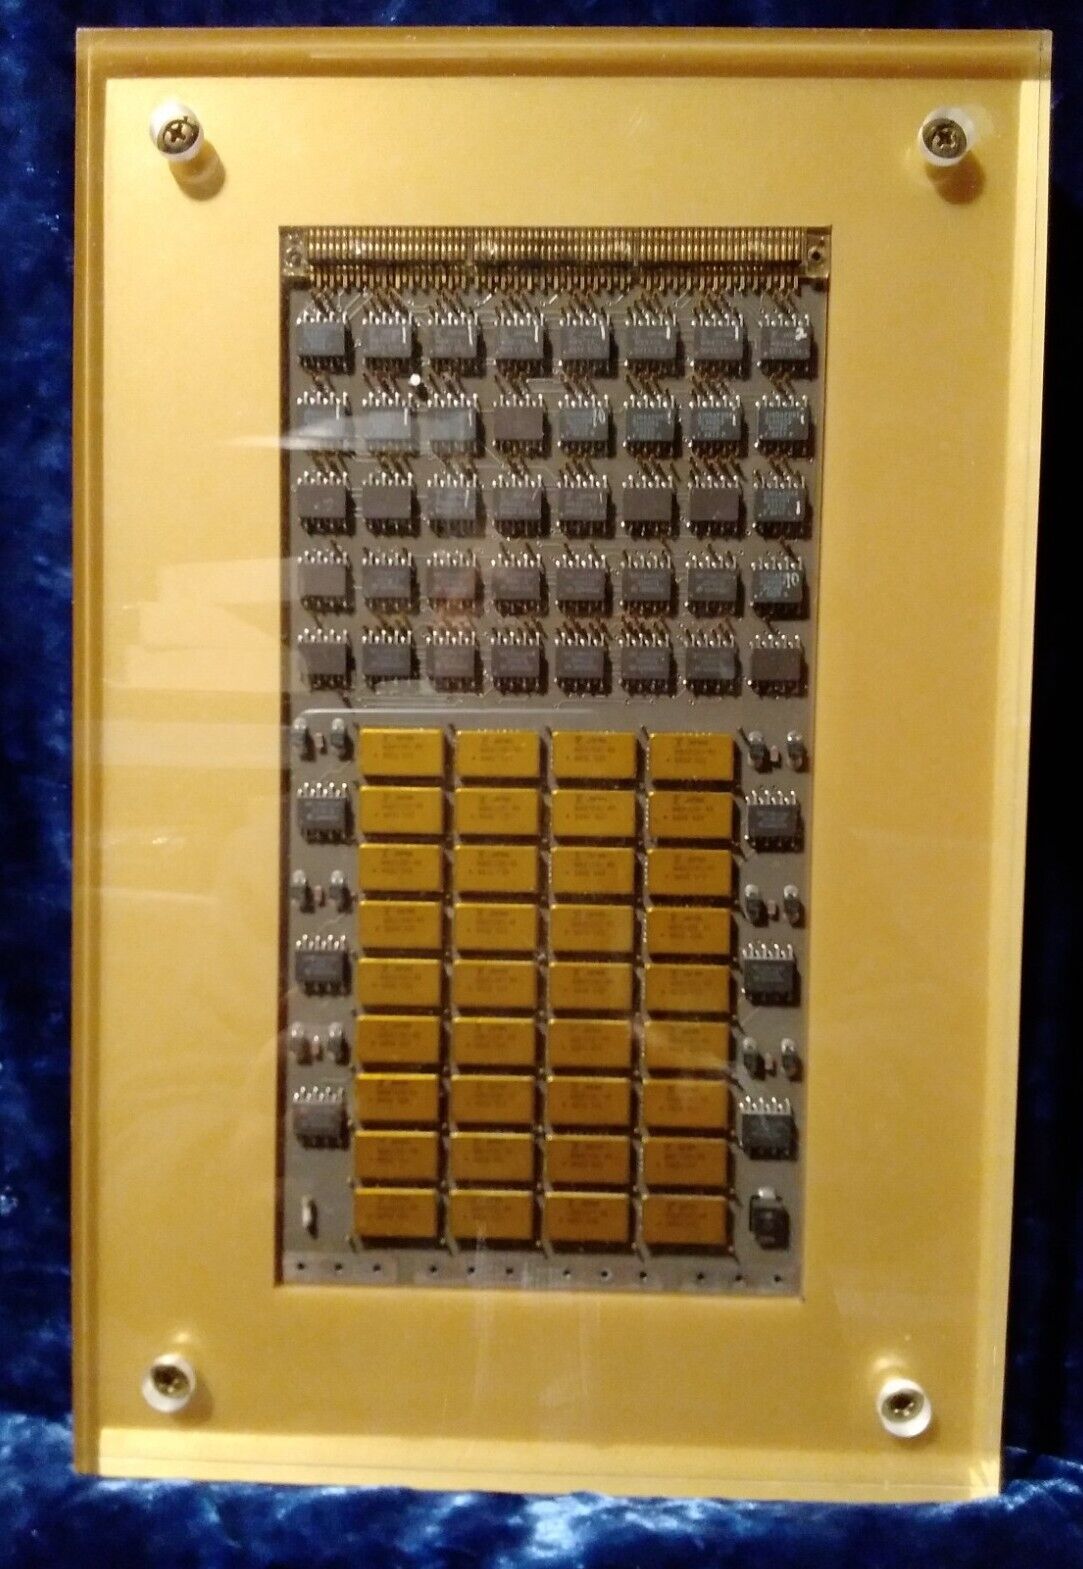 Cray-2 SuperComputer Memory Board in Lucite. No Engraving. $20+ more Engraving.